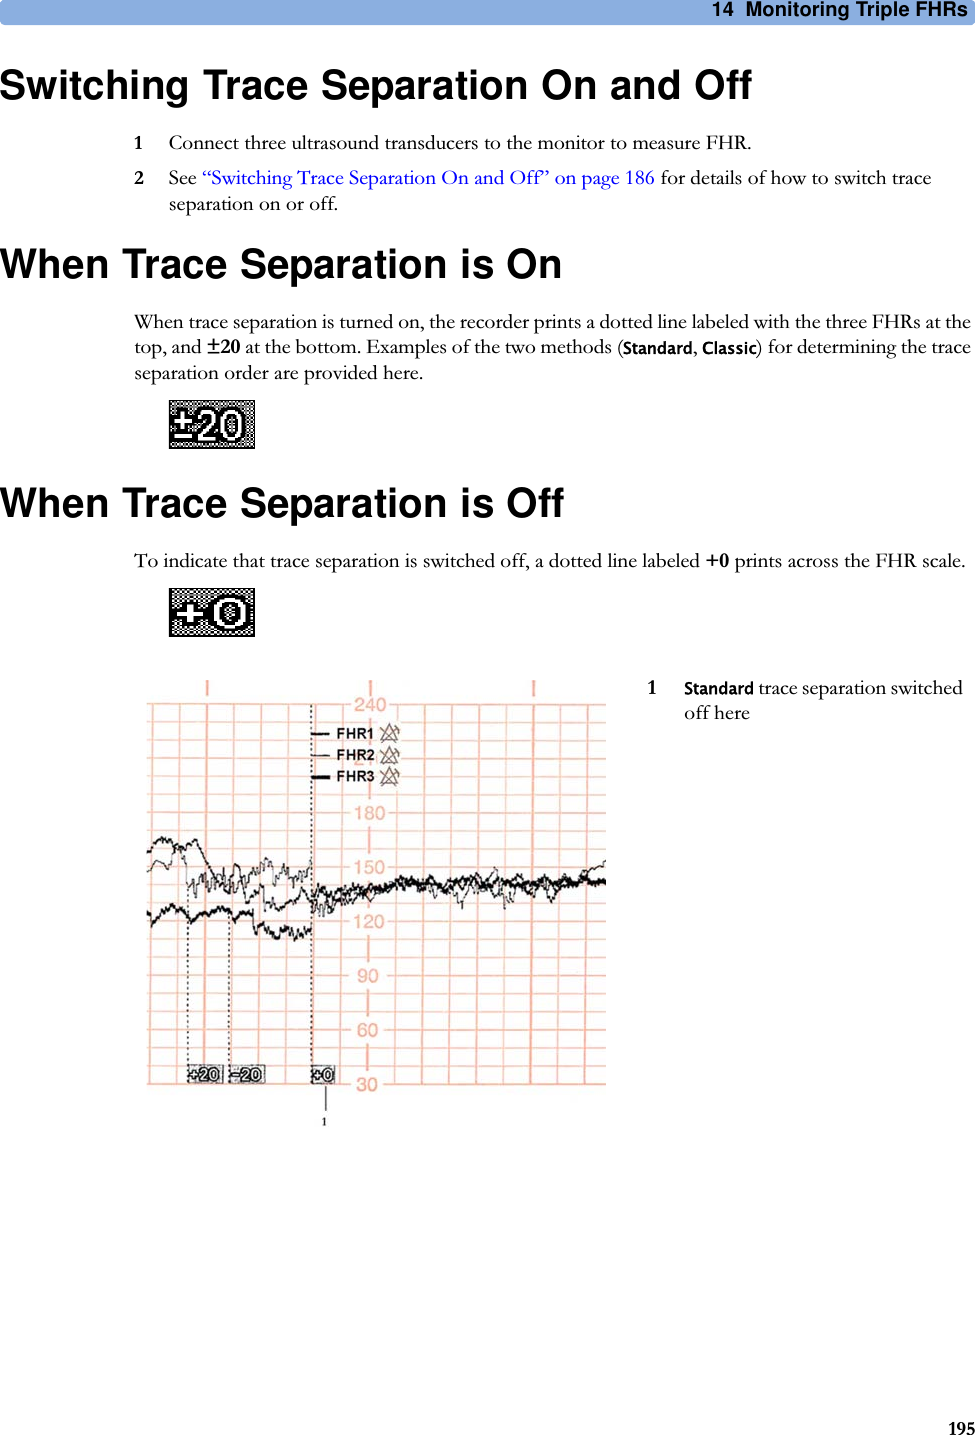 14  Monitoring Triple FHRs195Switching Trace Separation On and Off1Connect three ultrasound transducers to the monitor to measure FHR.2See “Switching Trace Separation On and Off” on page 186 for details of how to switch trace separation on or off.When Trace Separation is OnWhen trace separation is turned on, the recorder prints a dotted line labeled with the three FHRs at the top, and ±20 at the bottom. Examples of the two methods (Standard, Classic) for determining the trace separation order are provided here.When Trace Separation is OffTo indicate that trace separation is switched off, a dotted line labeled +0 prints across the FHR scale.1Standard trace separation switched off here